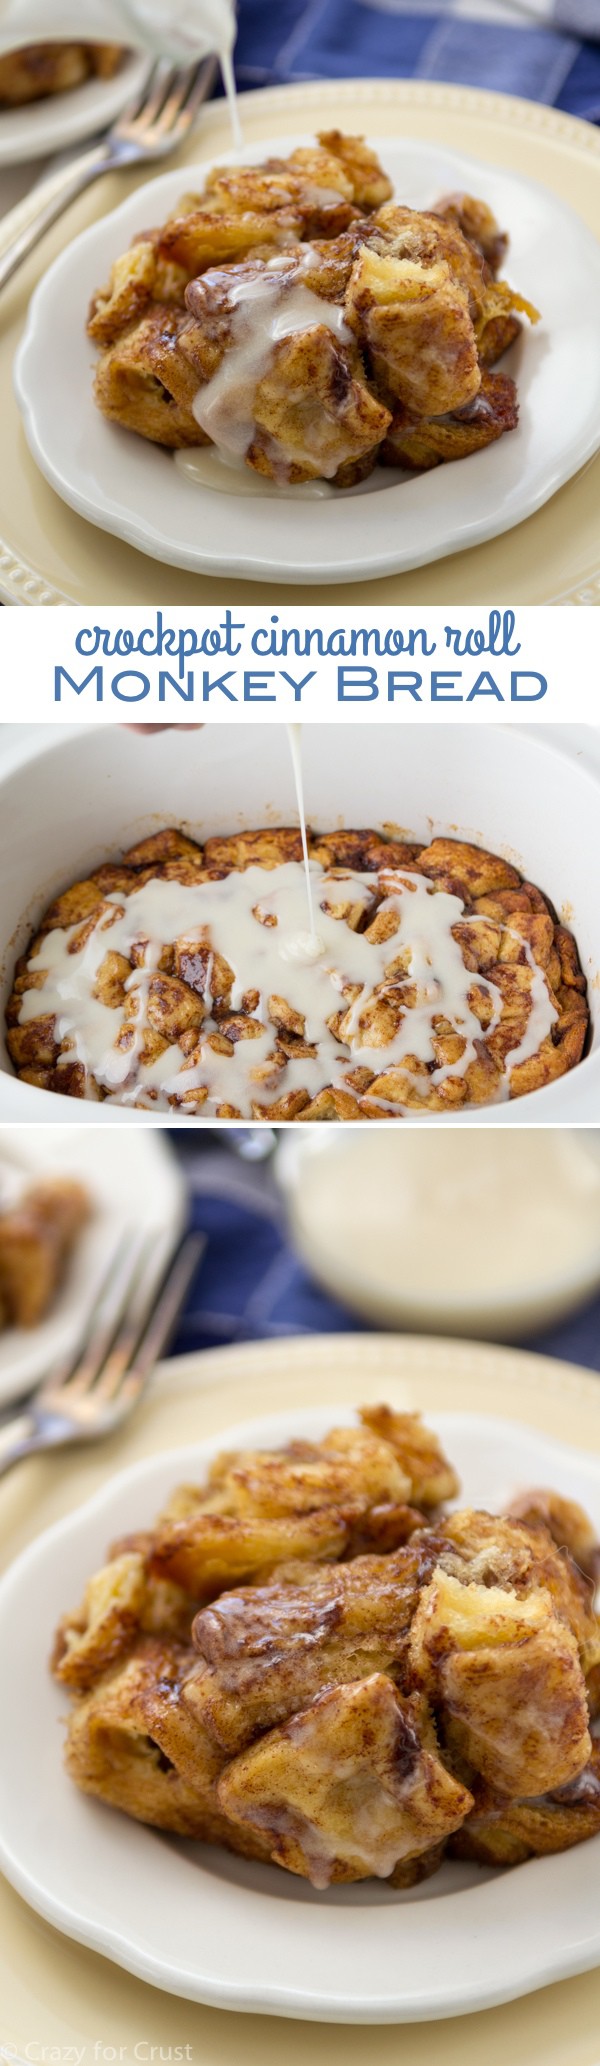 Slow Cooker Cinnamon Roll Monkey Bread is easy to make and cooks in a crockpot!